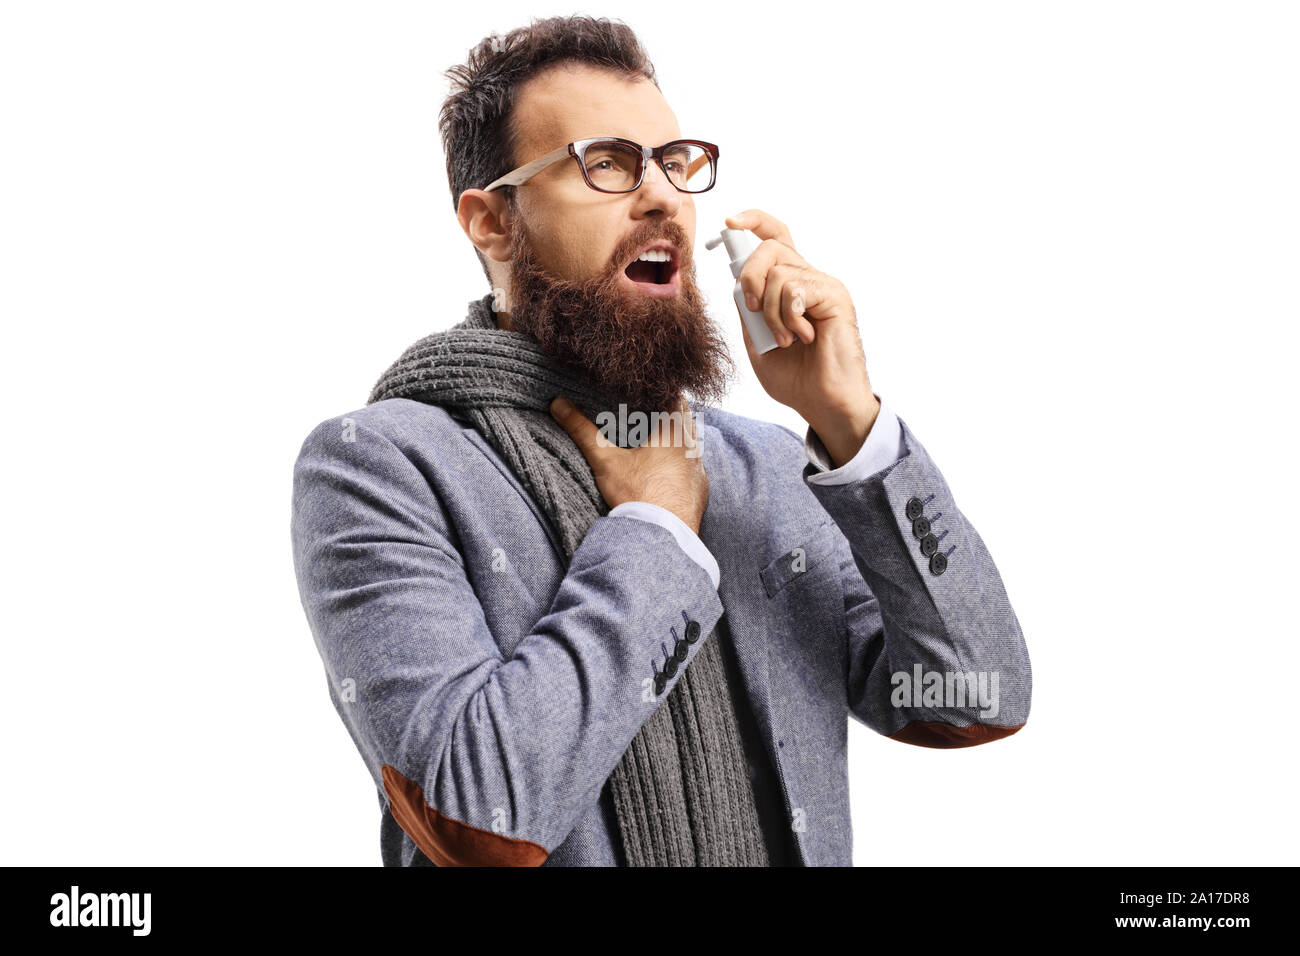 Bearded man with a sore throat spraying a medication isolated on white background Stock Photo